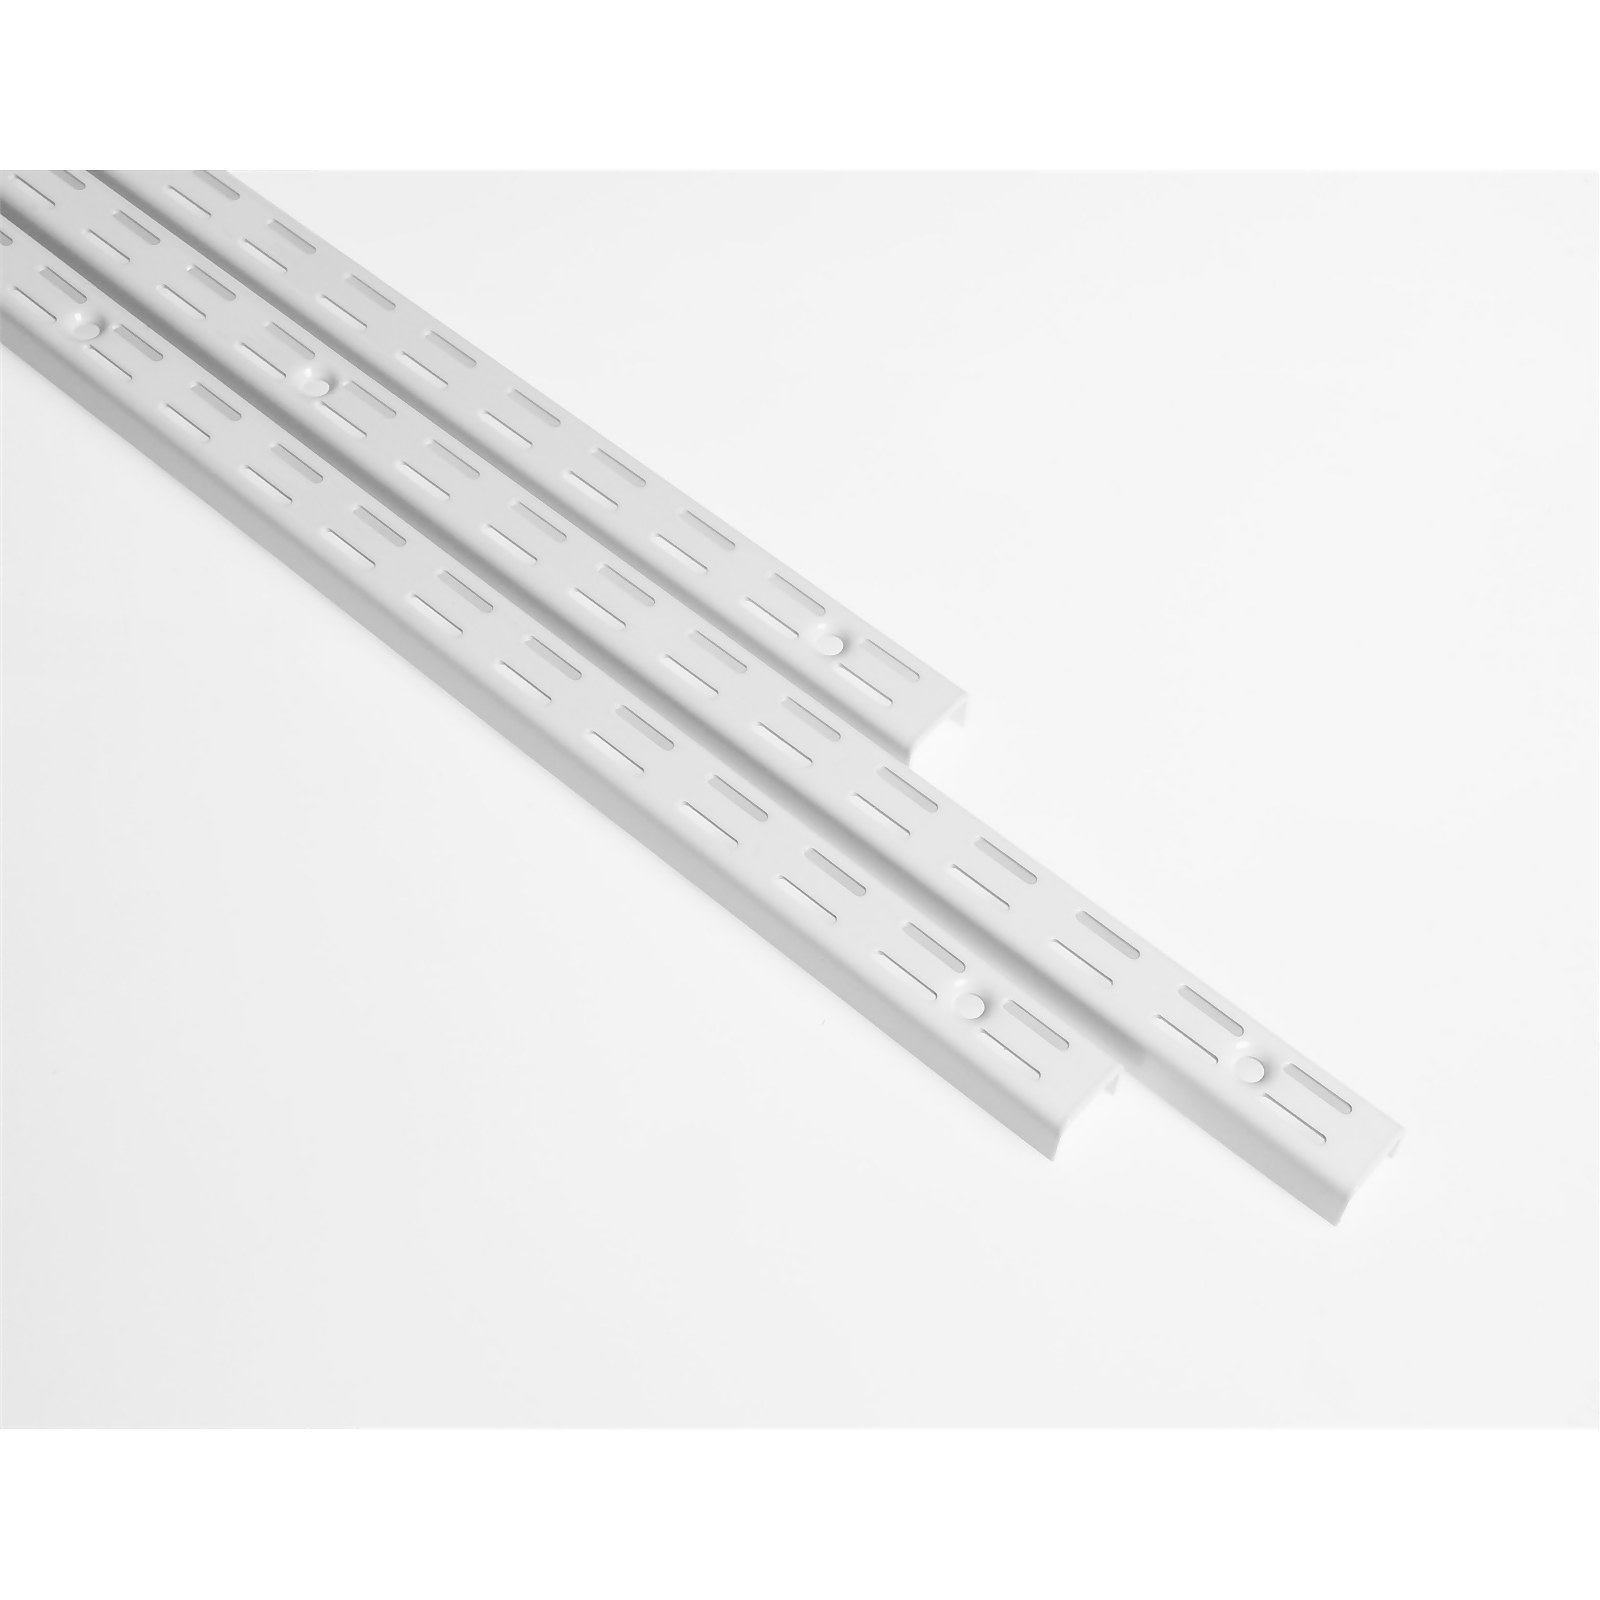 Photo of Anti-bacterial Twin Slot Shelving Kit - 1981mm White Twinslot And 216mm Brackets - White